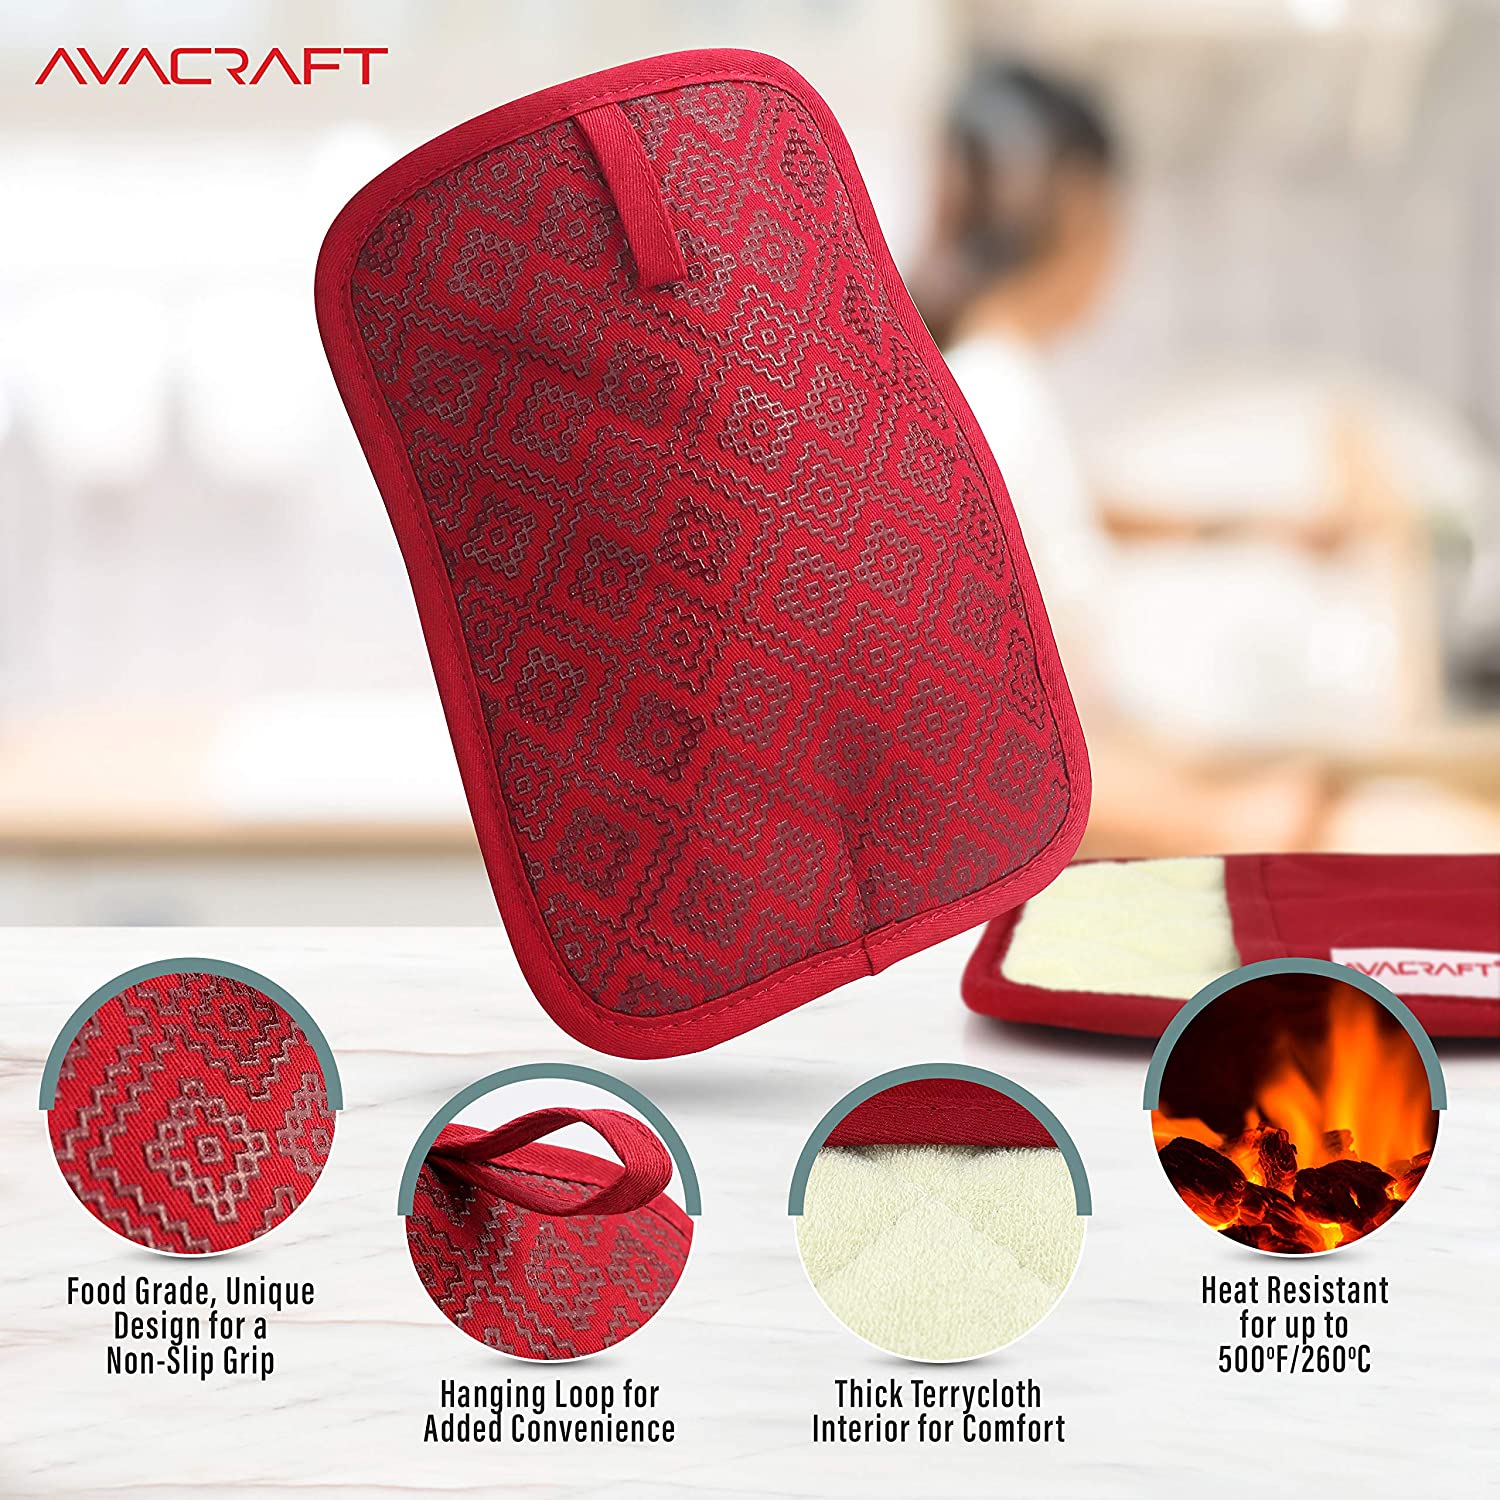 AVACRAFT Oven Mitts Pair, Flexible, 100% Cotton with Unique Heat Resistant Food Grade Silicone, Thick Terry Cloth Interior, 500 F Heat Resistant